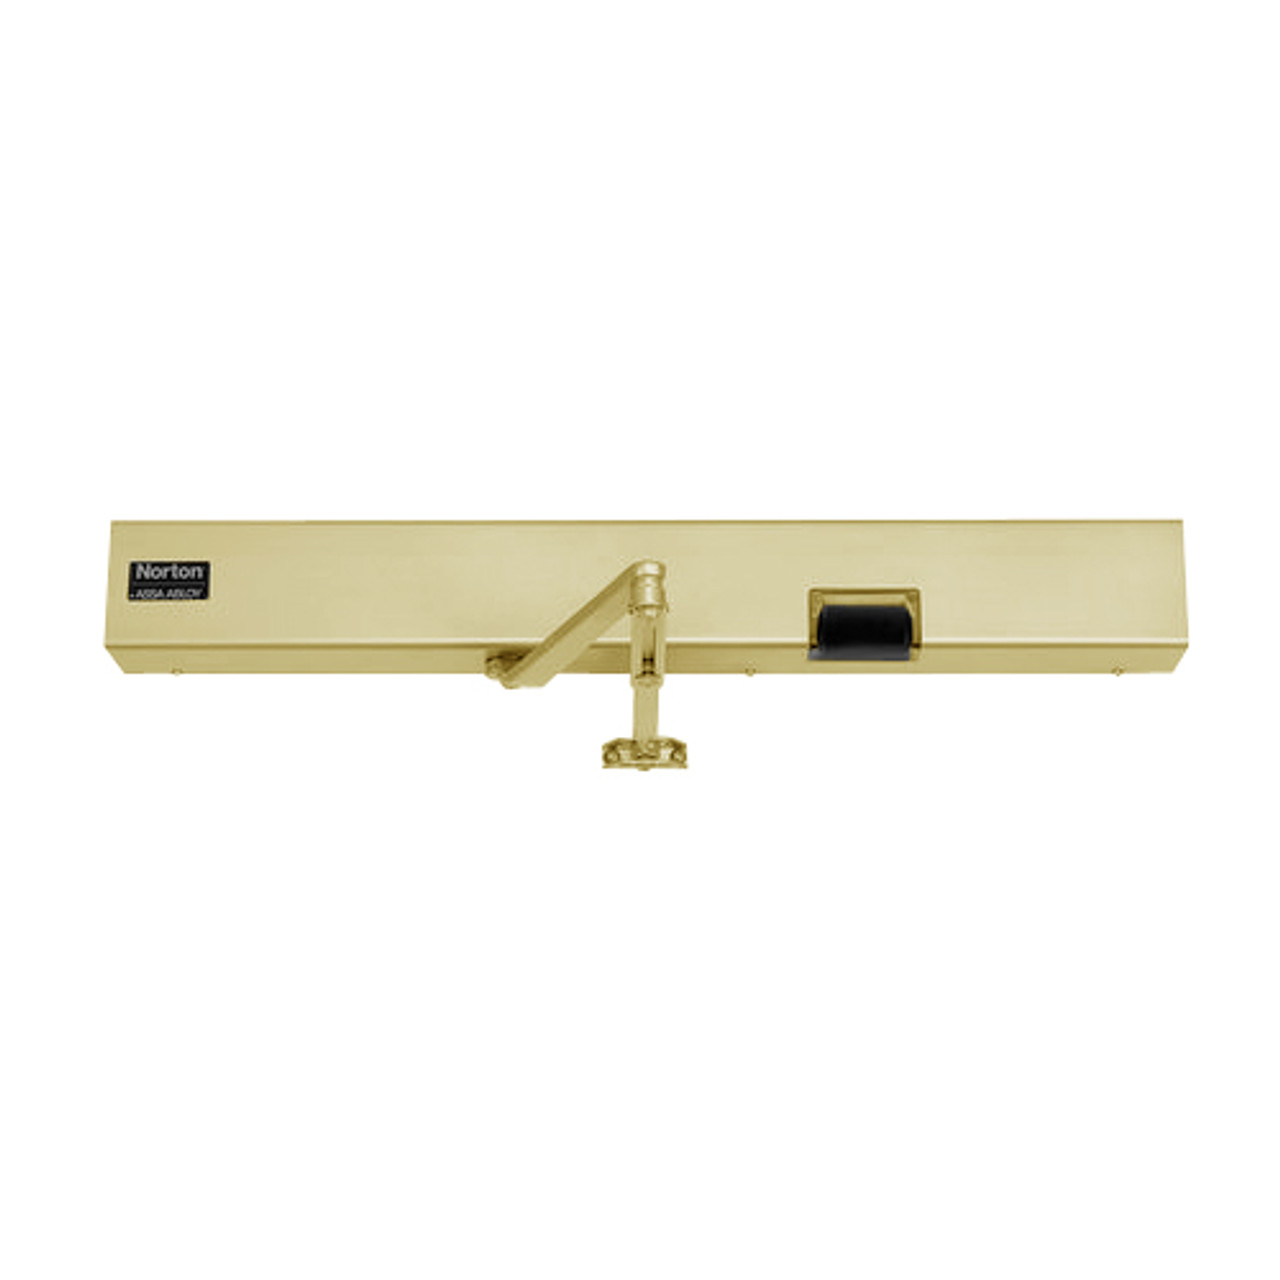 7134SZ-RH-120VAC-696 Norton 7100SZ Series Safe Zone Multi-Point Closer/Holder with Motion Sensor and Push Side Double Lever 13-1/2 inch Main Arm in Gold Finish